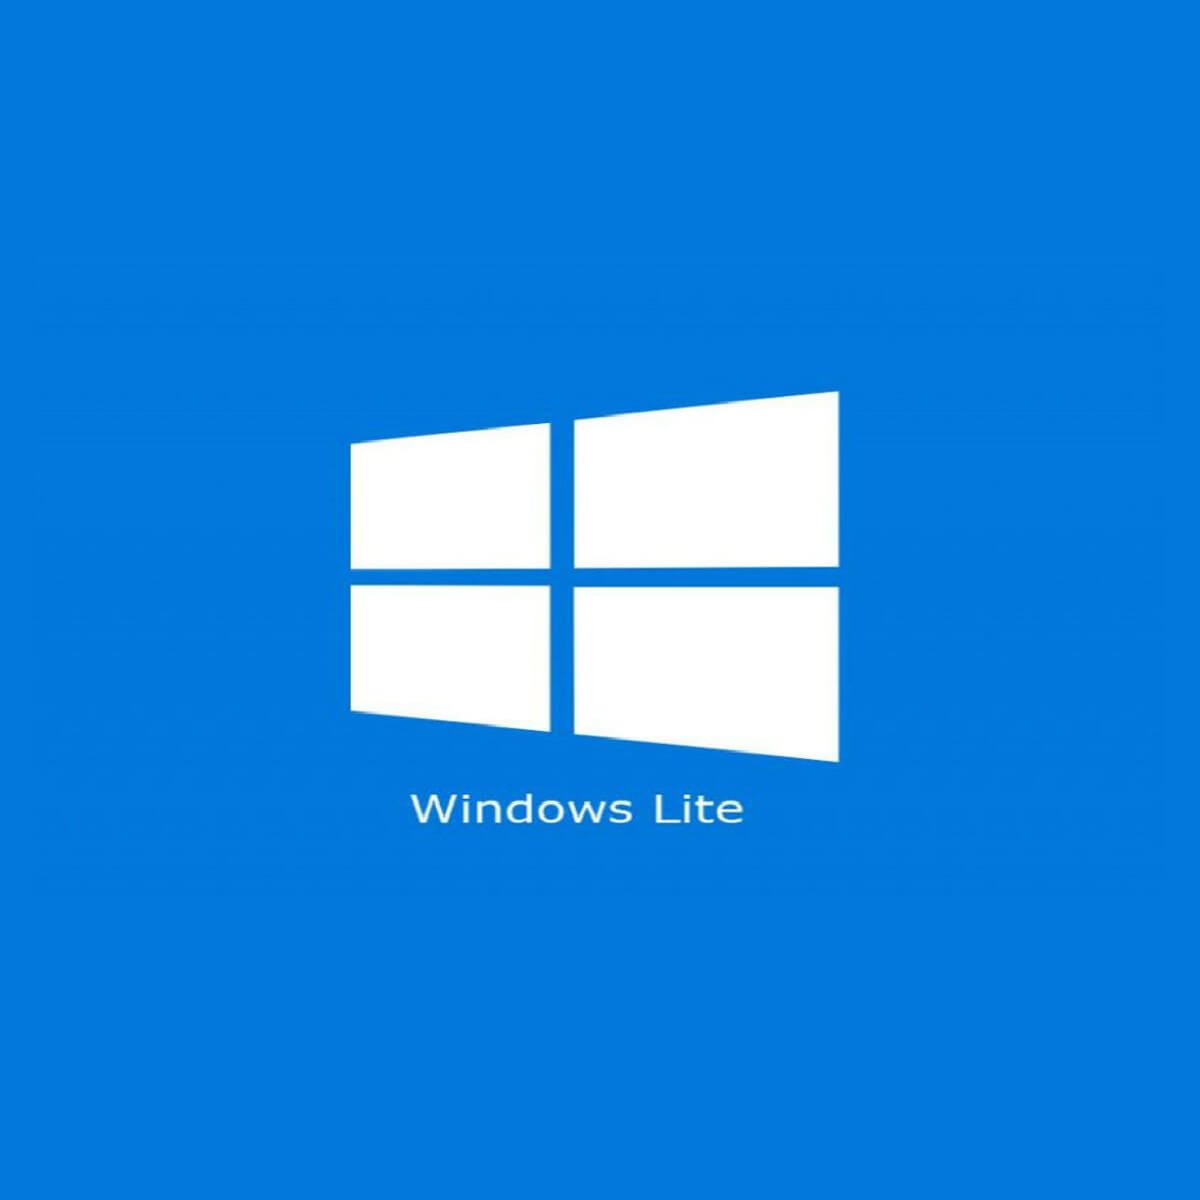 Windows Lite OS support Win32 apps